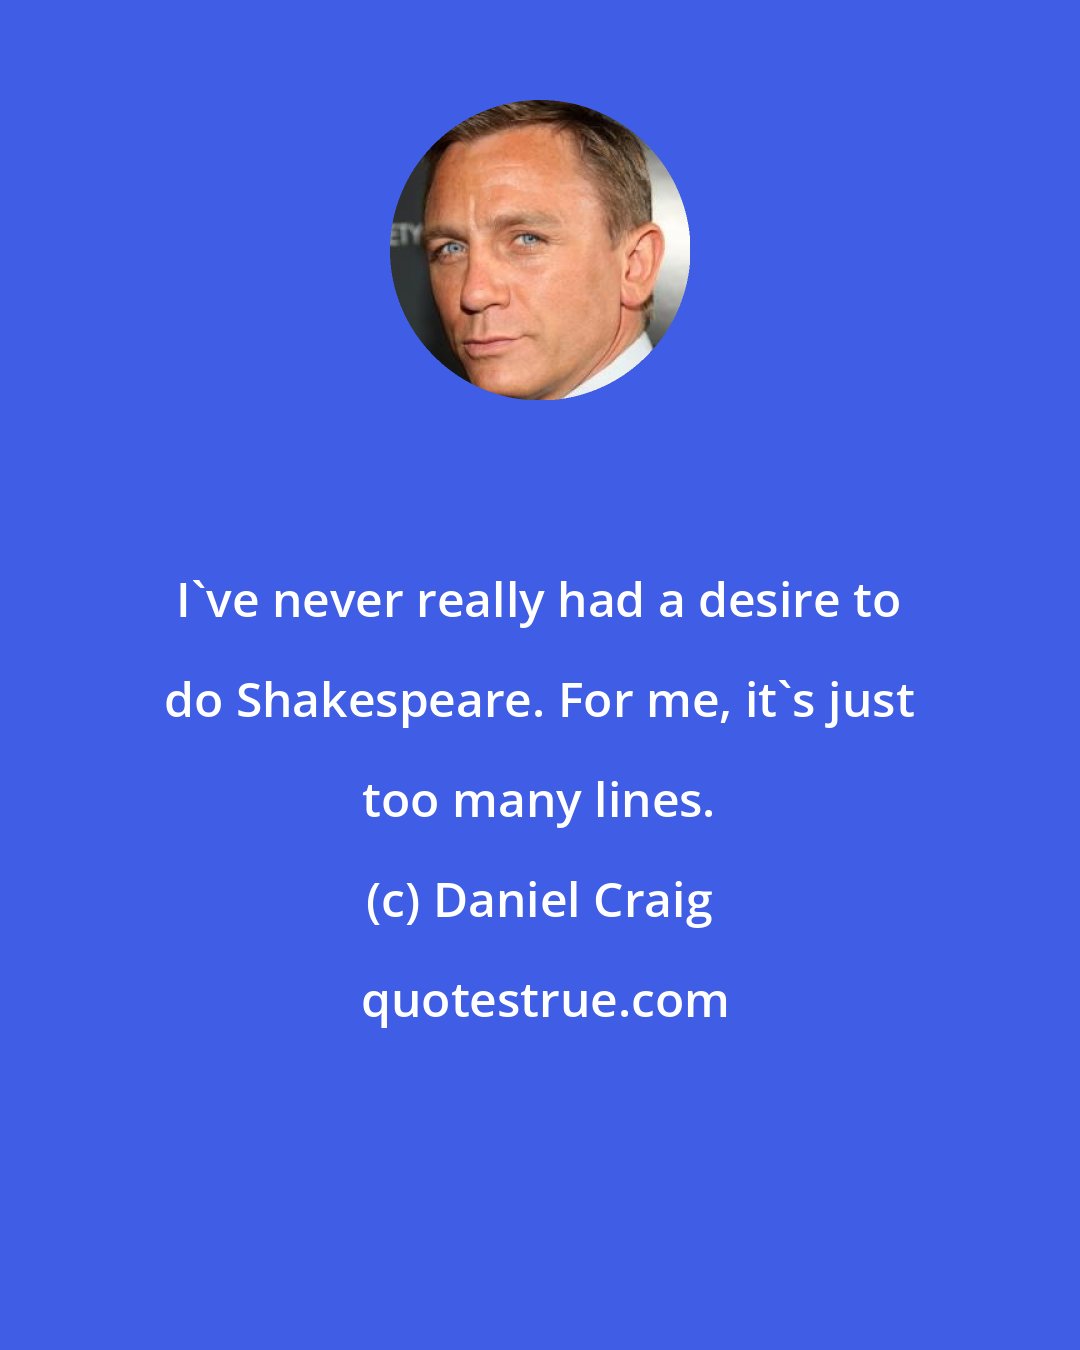 Daniel Craig: I've never really had a desire to do Shakespeare. For me, it's just too many lines.